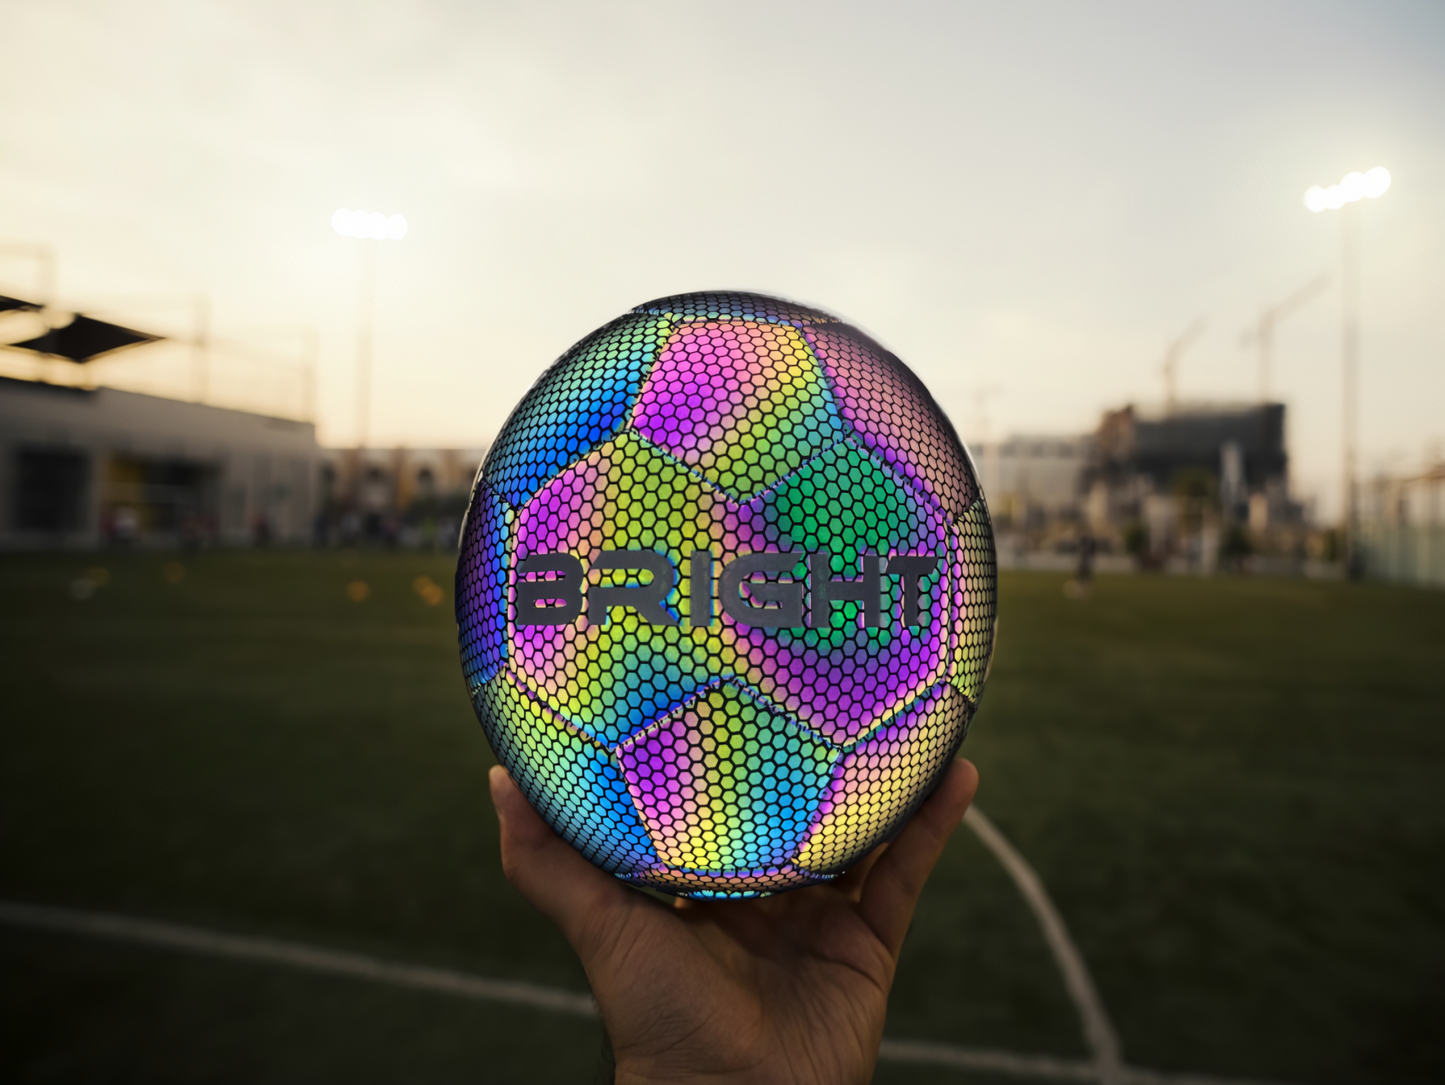 Illuminate the Game with Our Reflective Soccer Ball